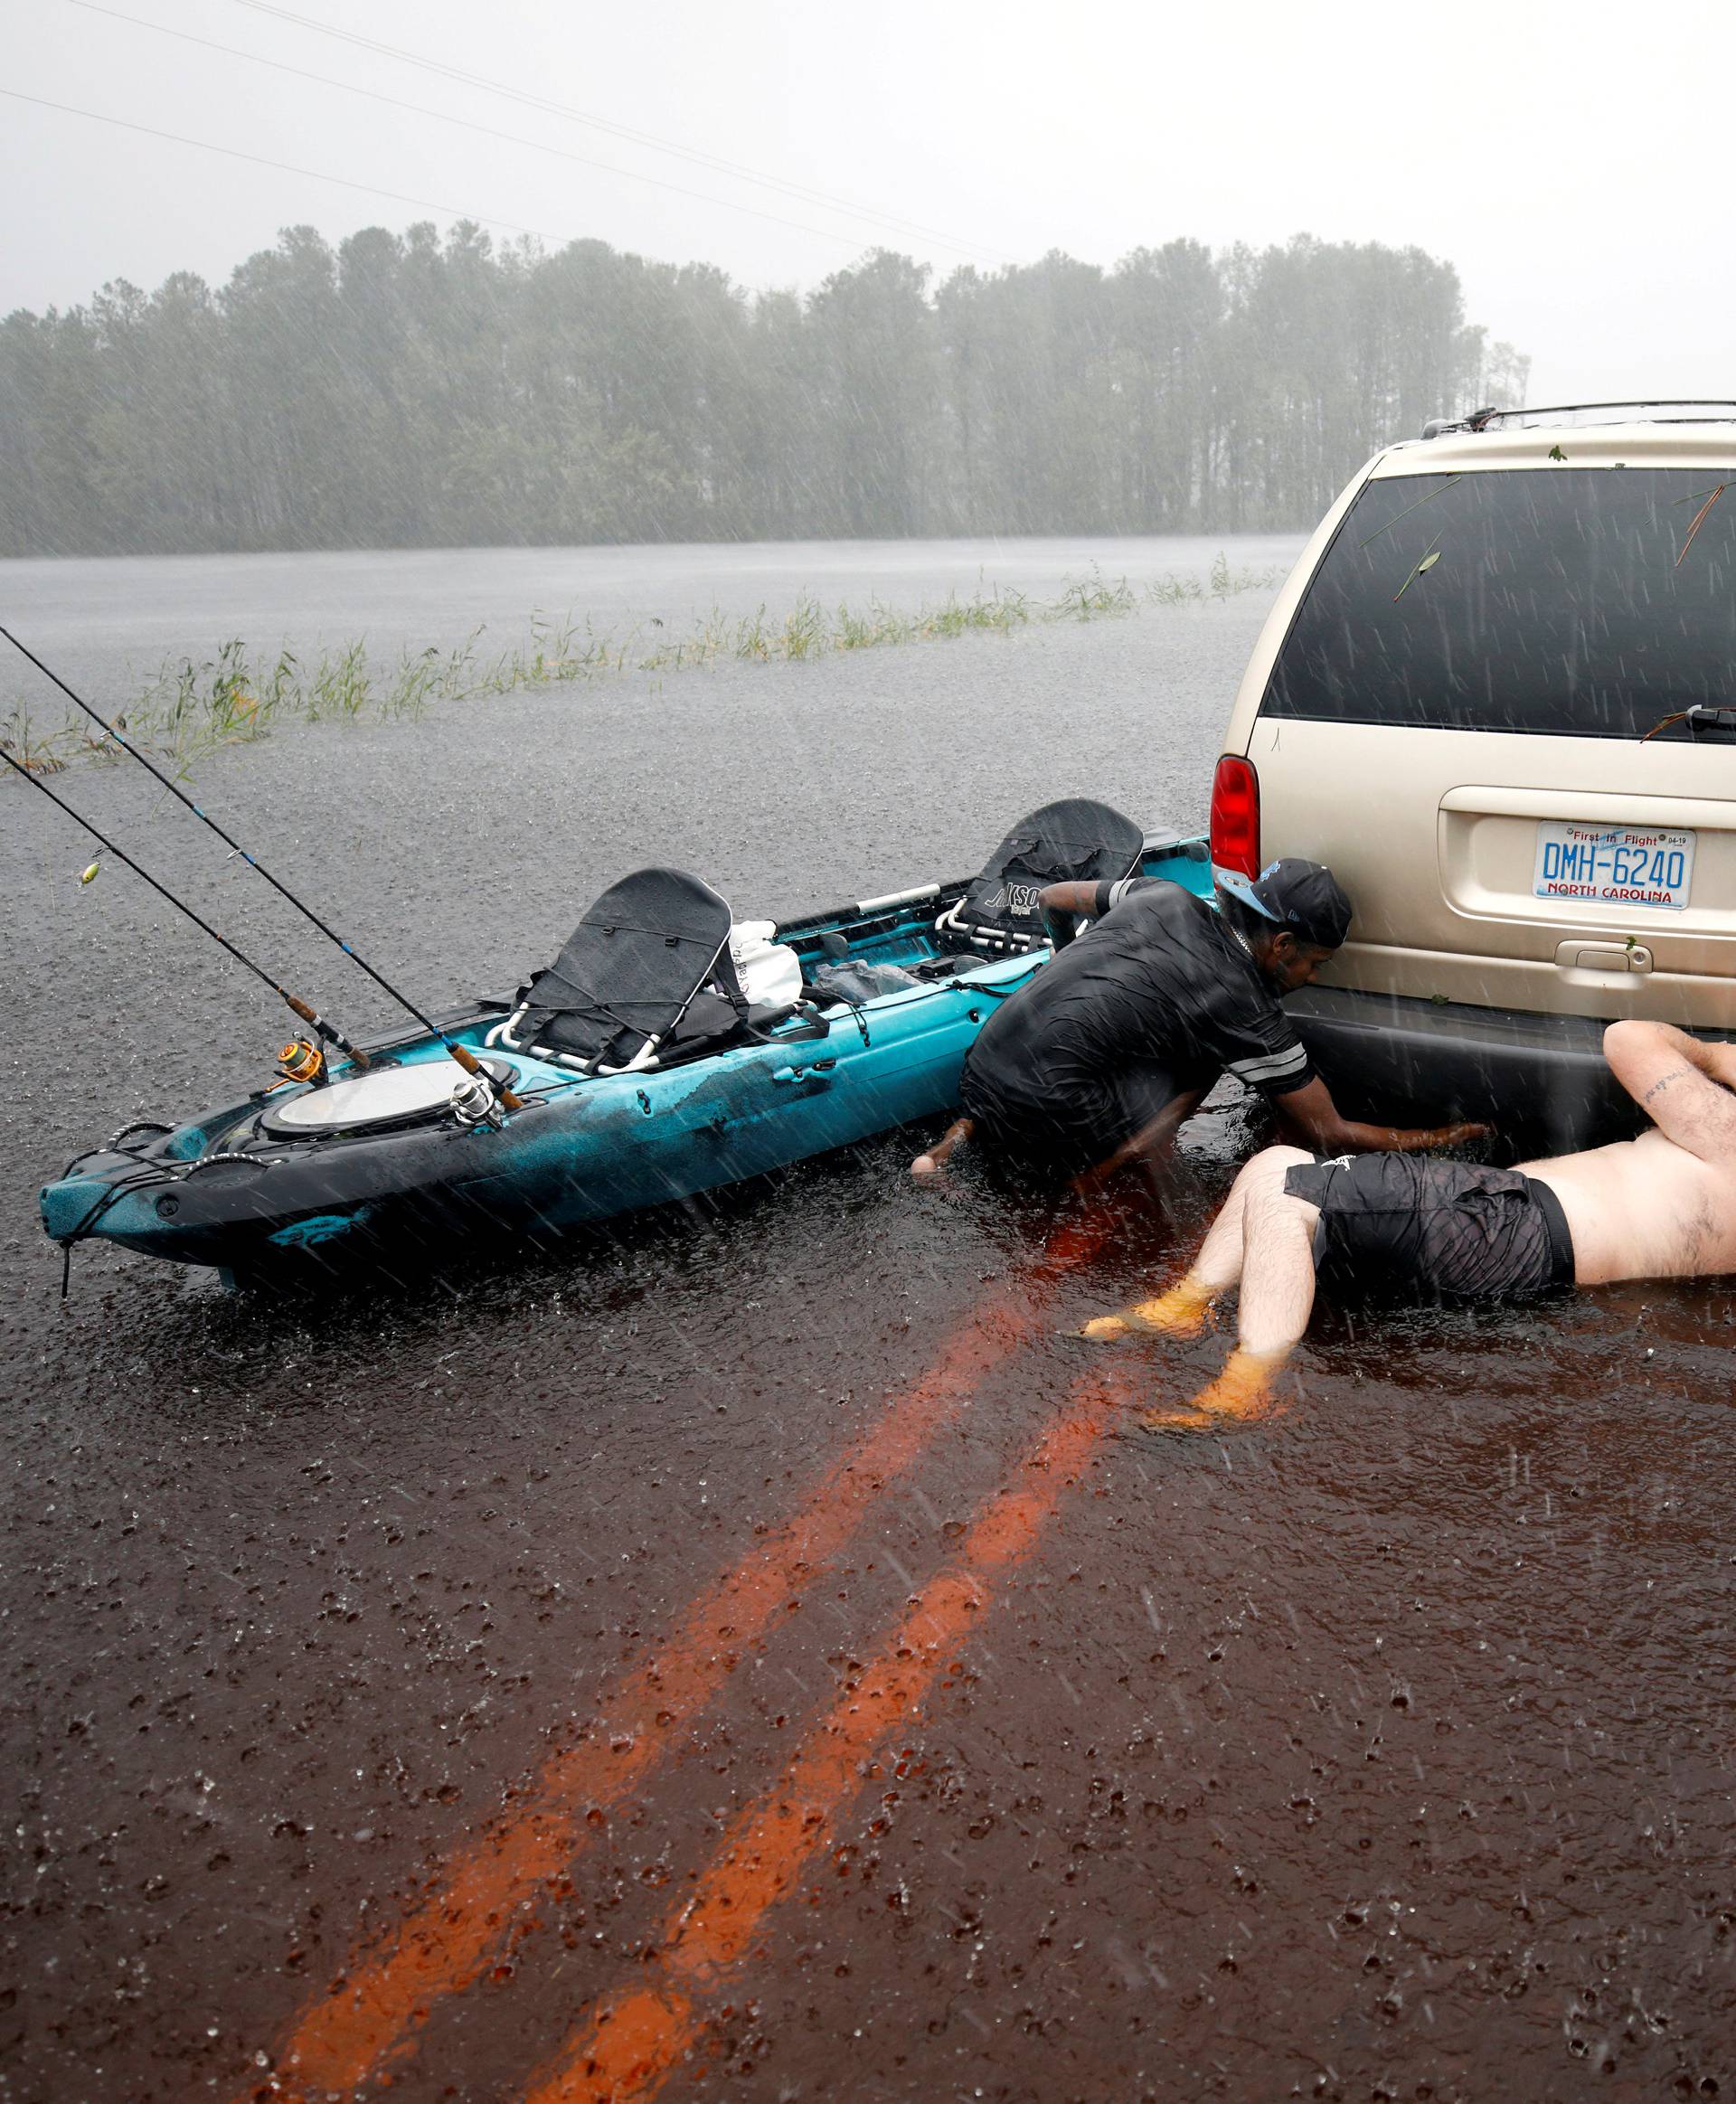 Jordan McKeon and Nathaniel Harrison try to free stalled car after Hurricane Florence struck in Boiling Spring Lakes